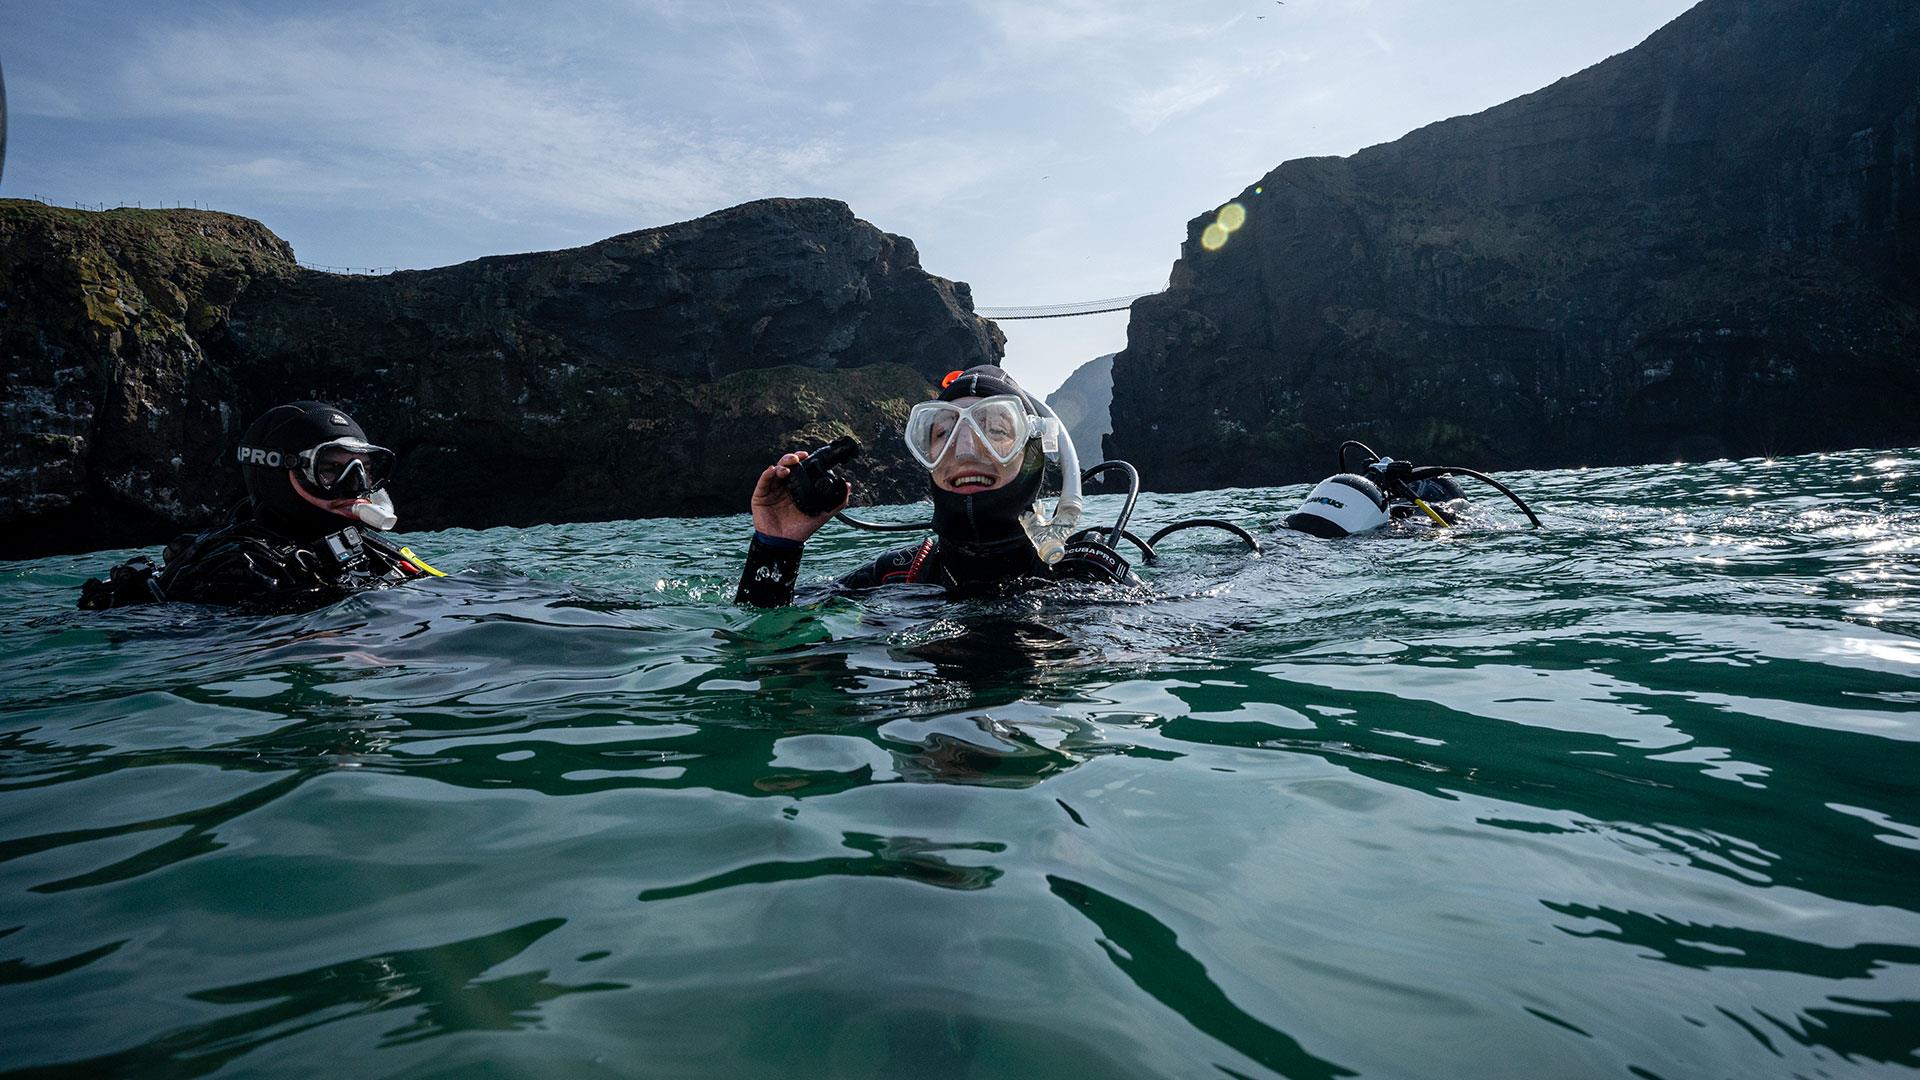 Group in wetsuits in the water with Carrick-a-Rede Rope Bridge in the background as part of a scuba diving experience with Aquaholics